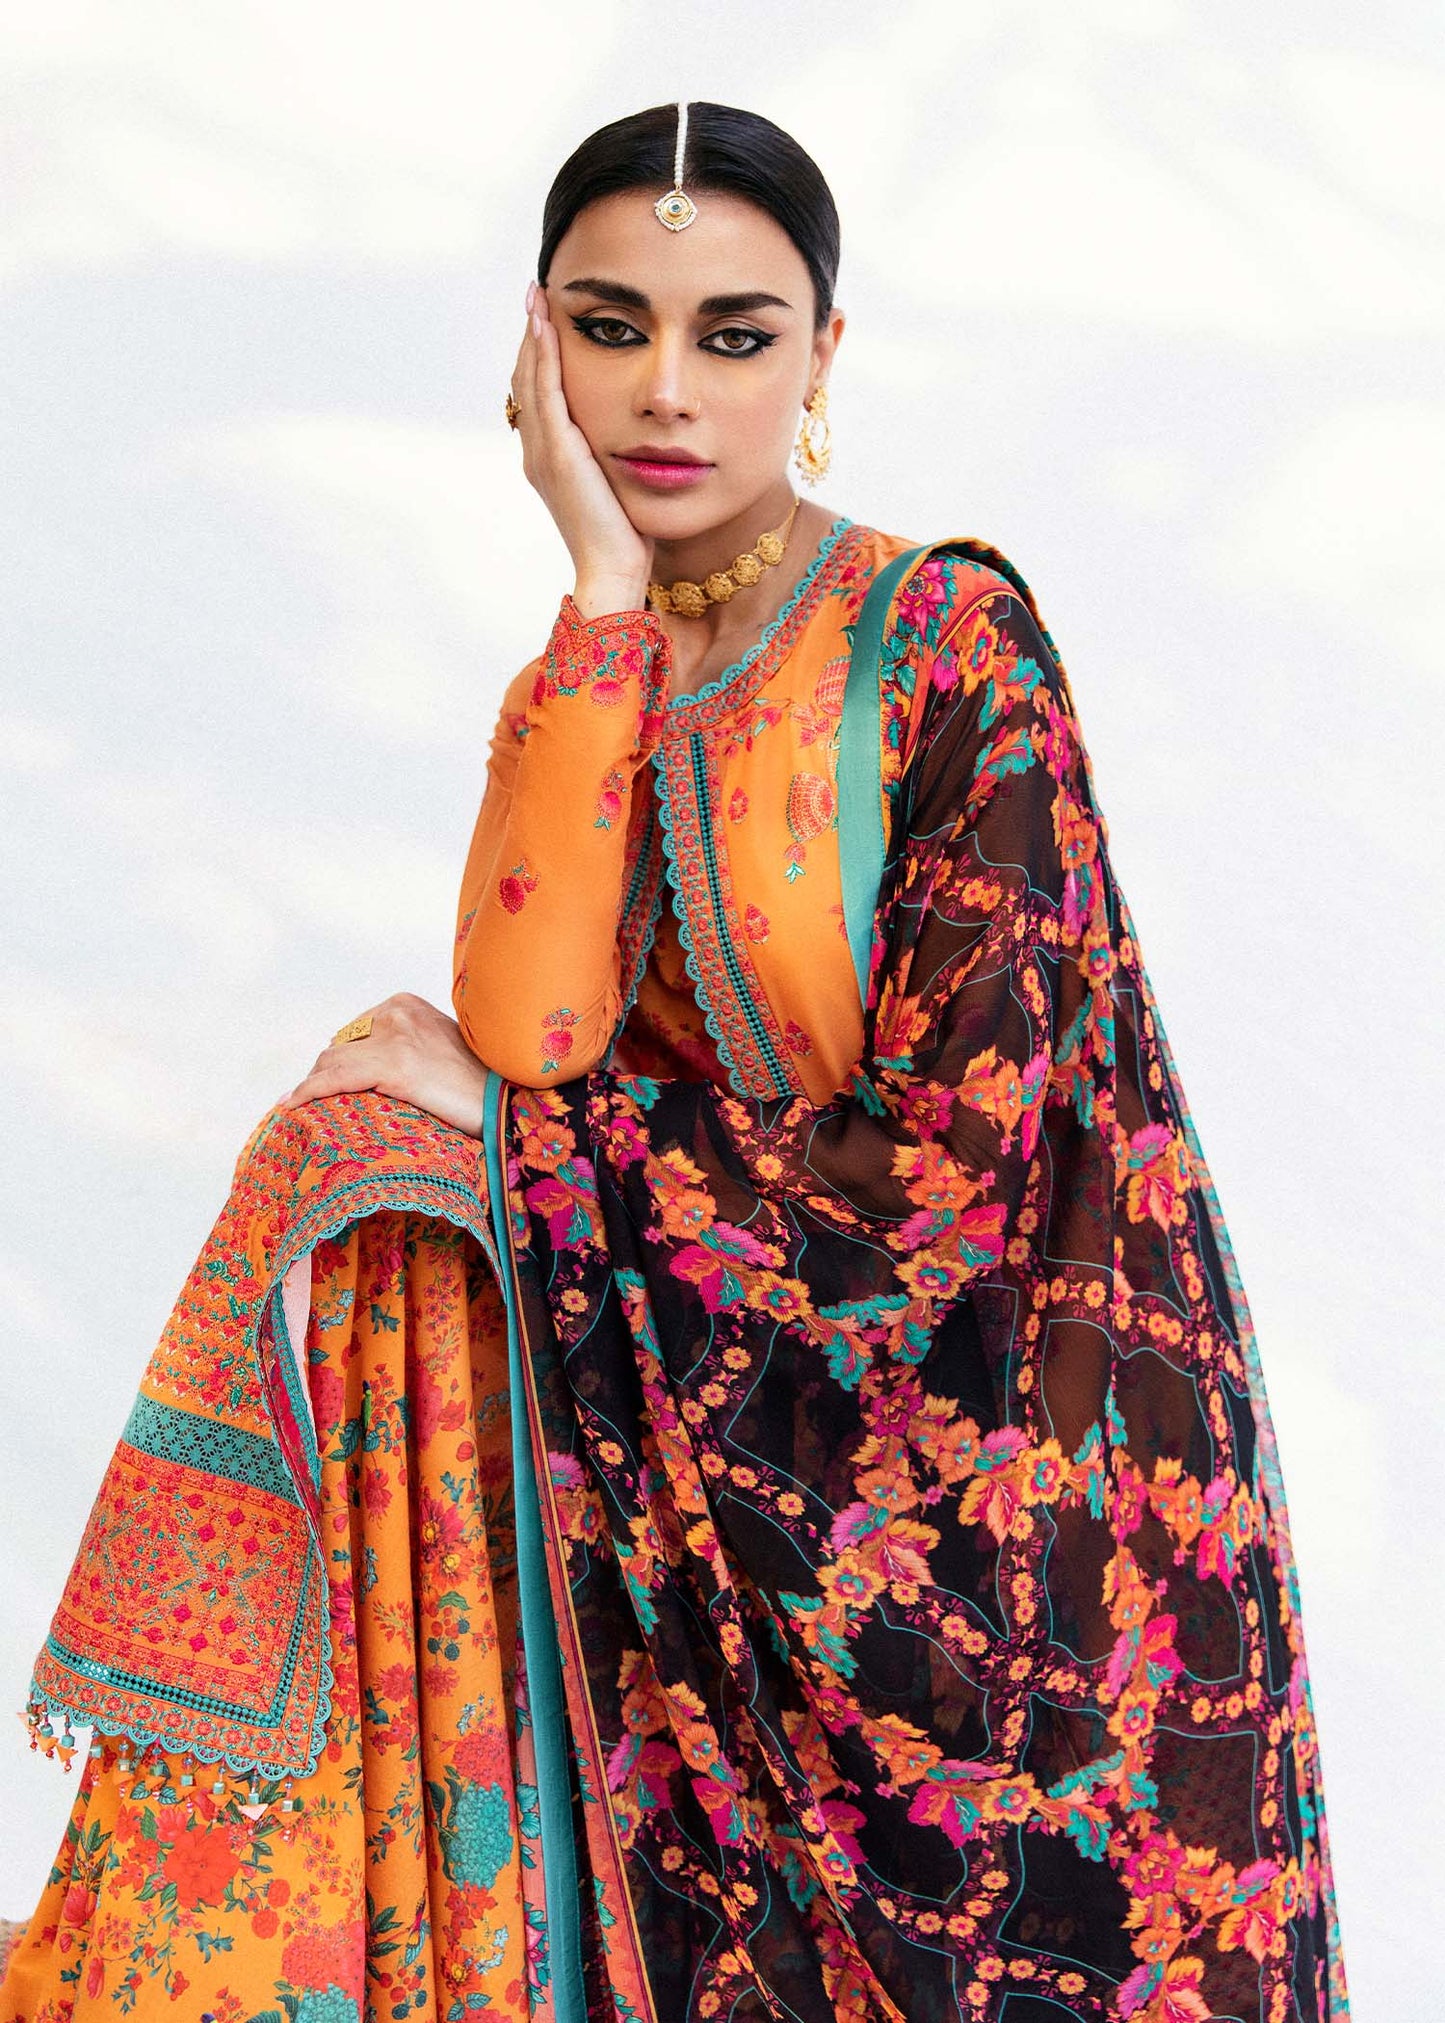 Buy Now, AFTAB - Masuam Lawn Collection'23 - Hussain Rehar - Pakistani Designer Clothes - Bridal and Party Dresses - Shahana Collection UK 